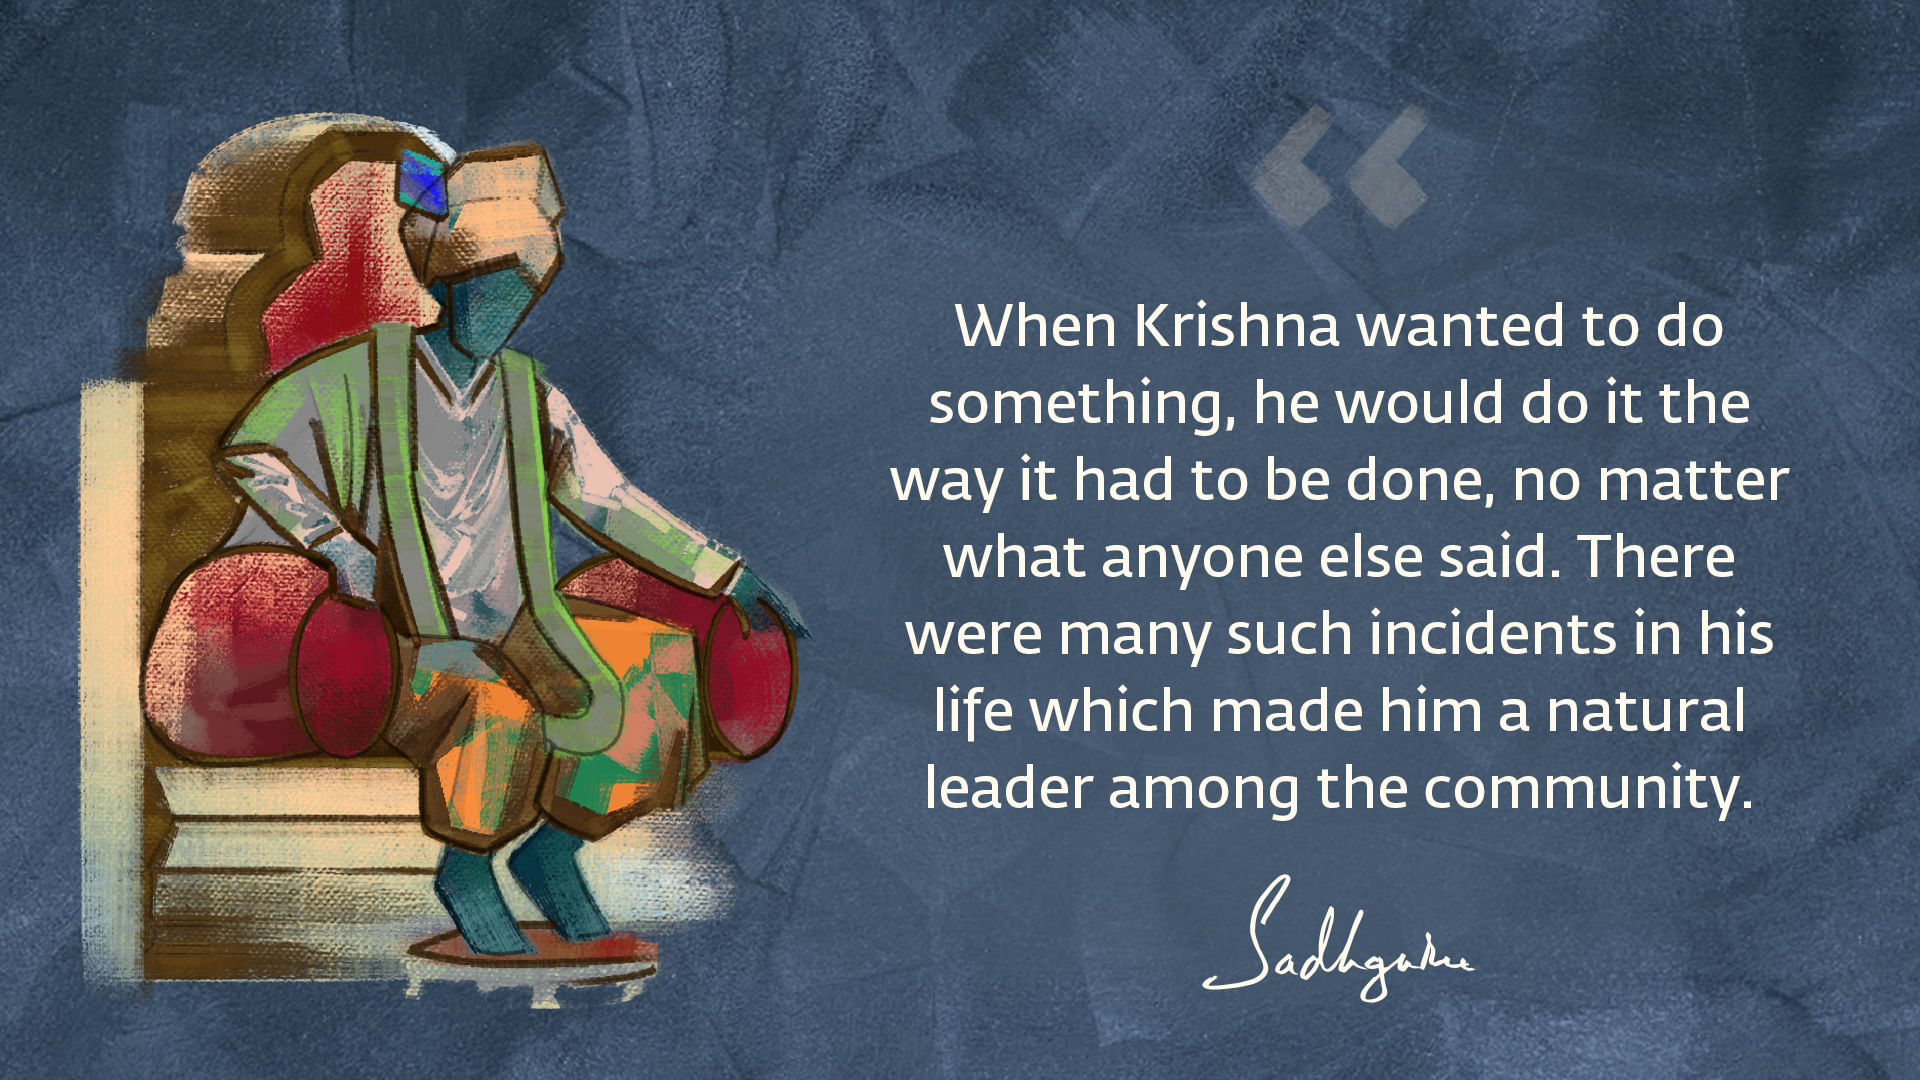 Krishna quote from Sadhguru with abstract Krishna as an emperor, sitting on throne.